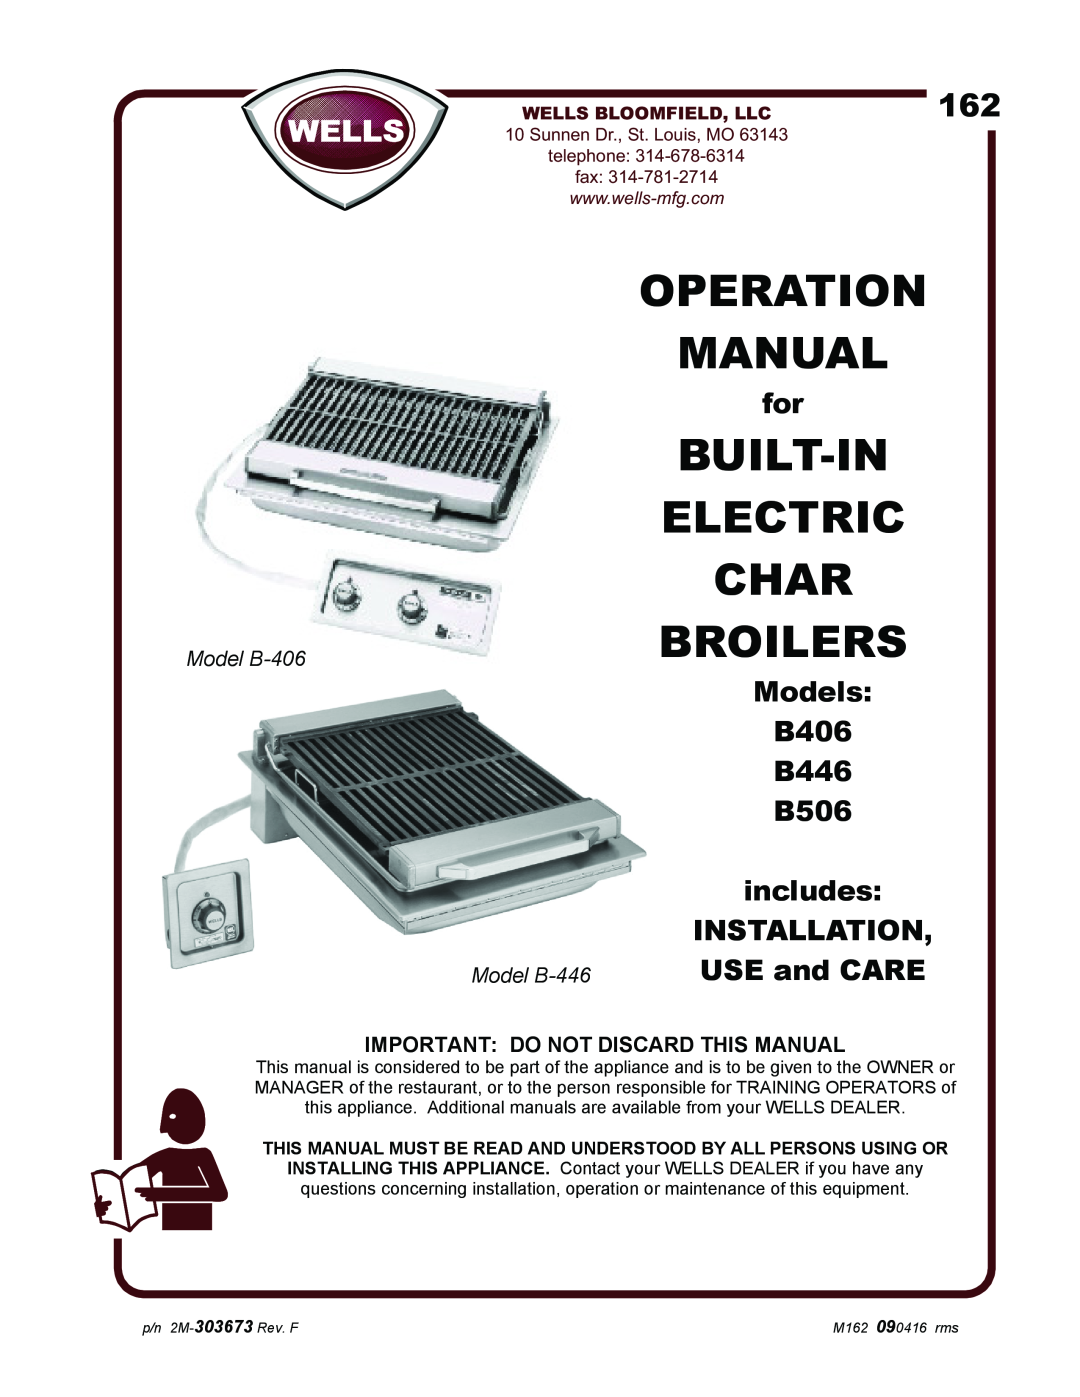 Wells B406 operation manual Important Do Not Discard This Manual, Wells Bloomfield, Llc, Operation, Electric, Char, Models 